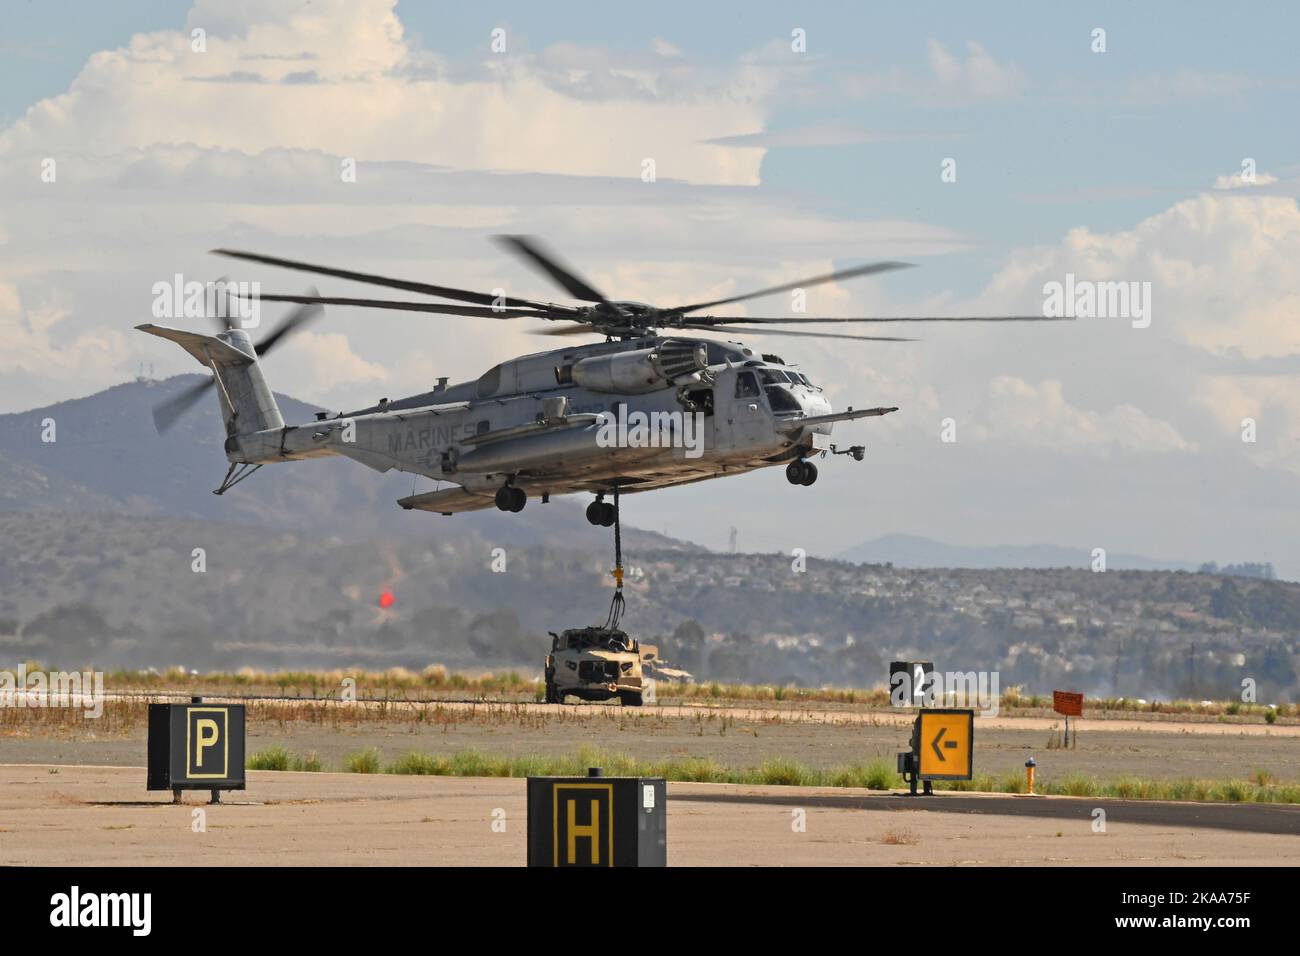 USMC CH-53E Super Stallion helicopter drops off a vehicle aboard MCAS Miramar in San Diego, California Stock Photo